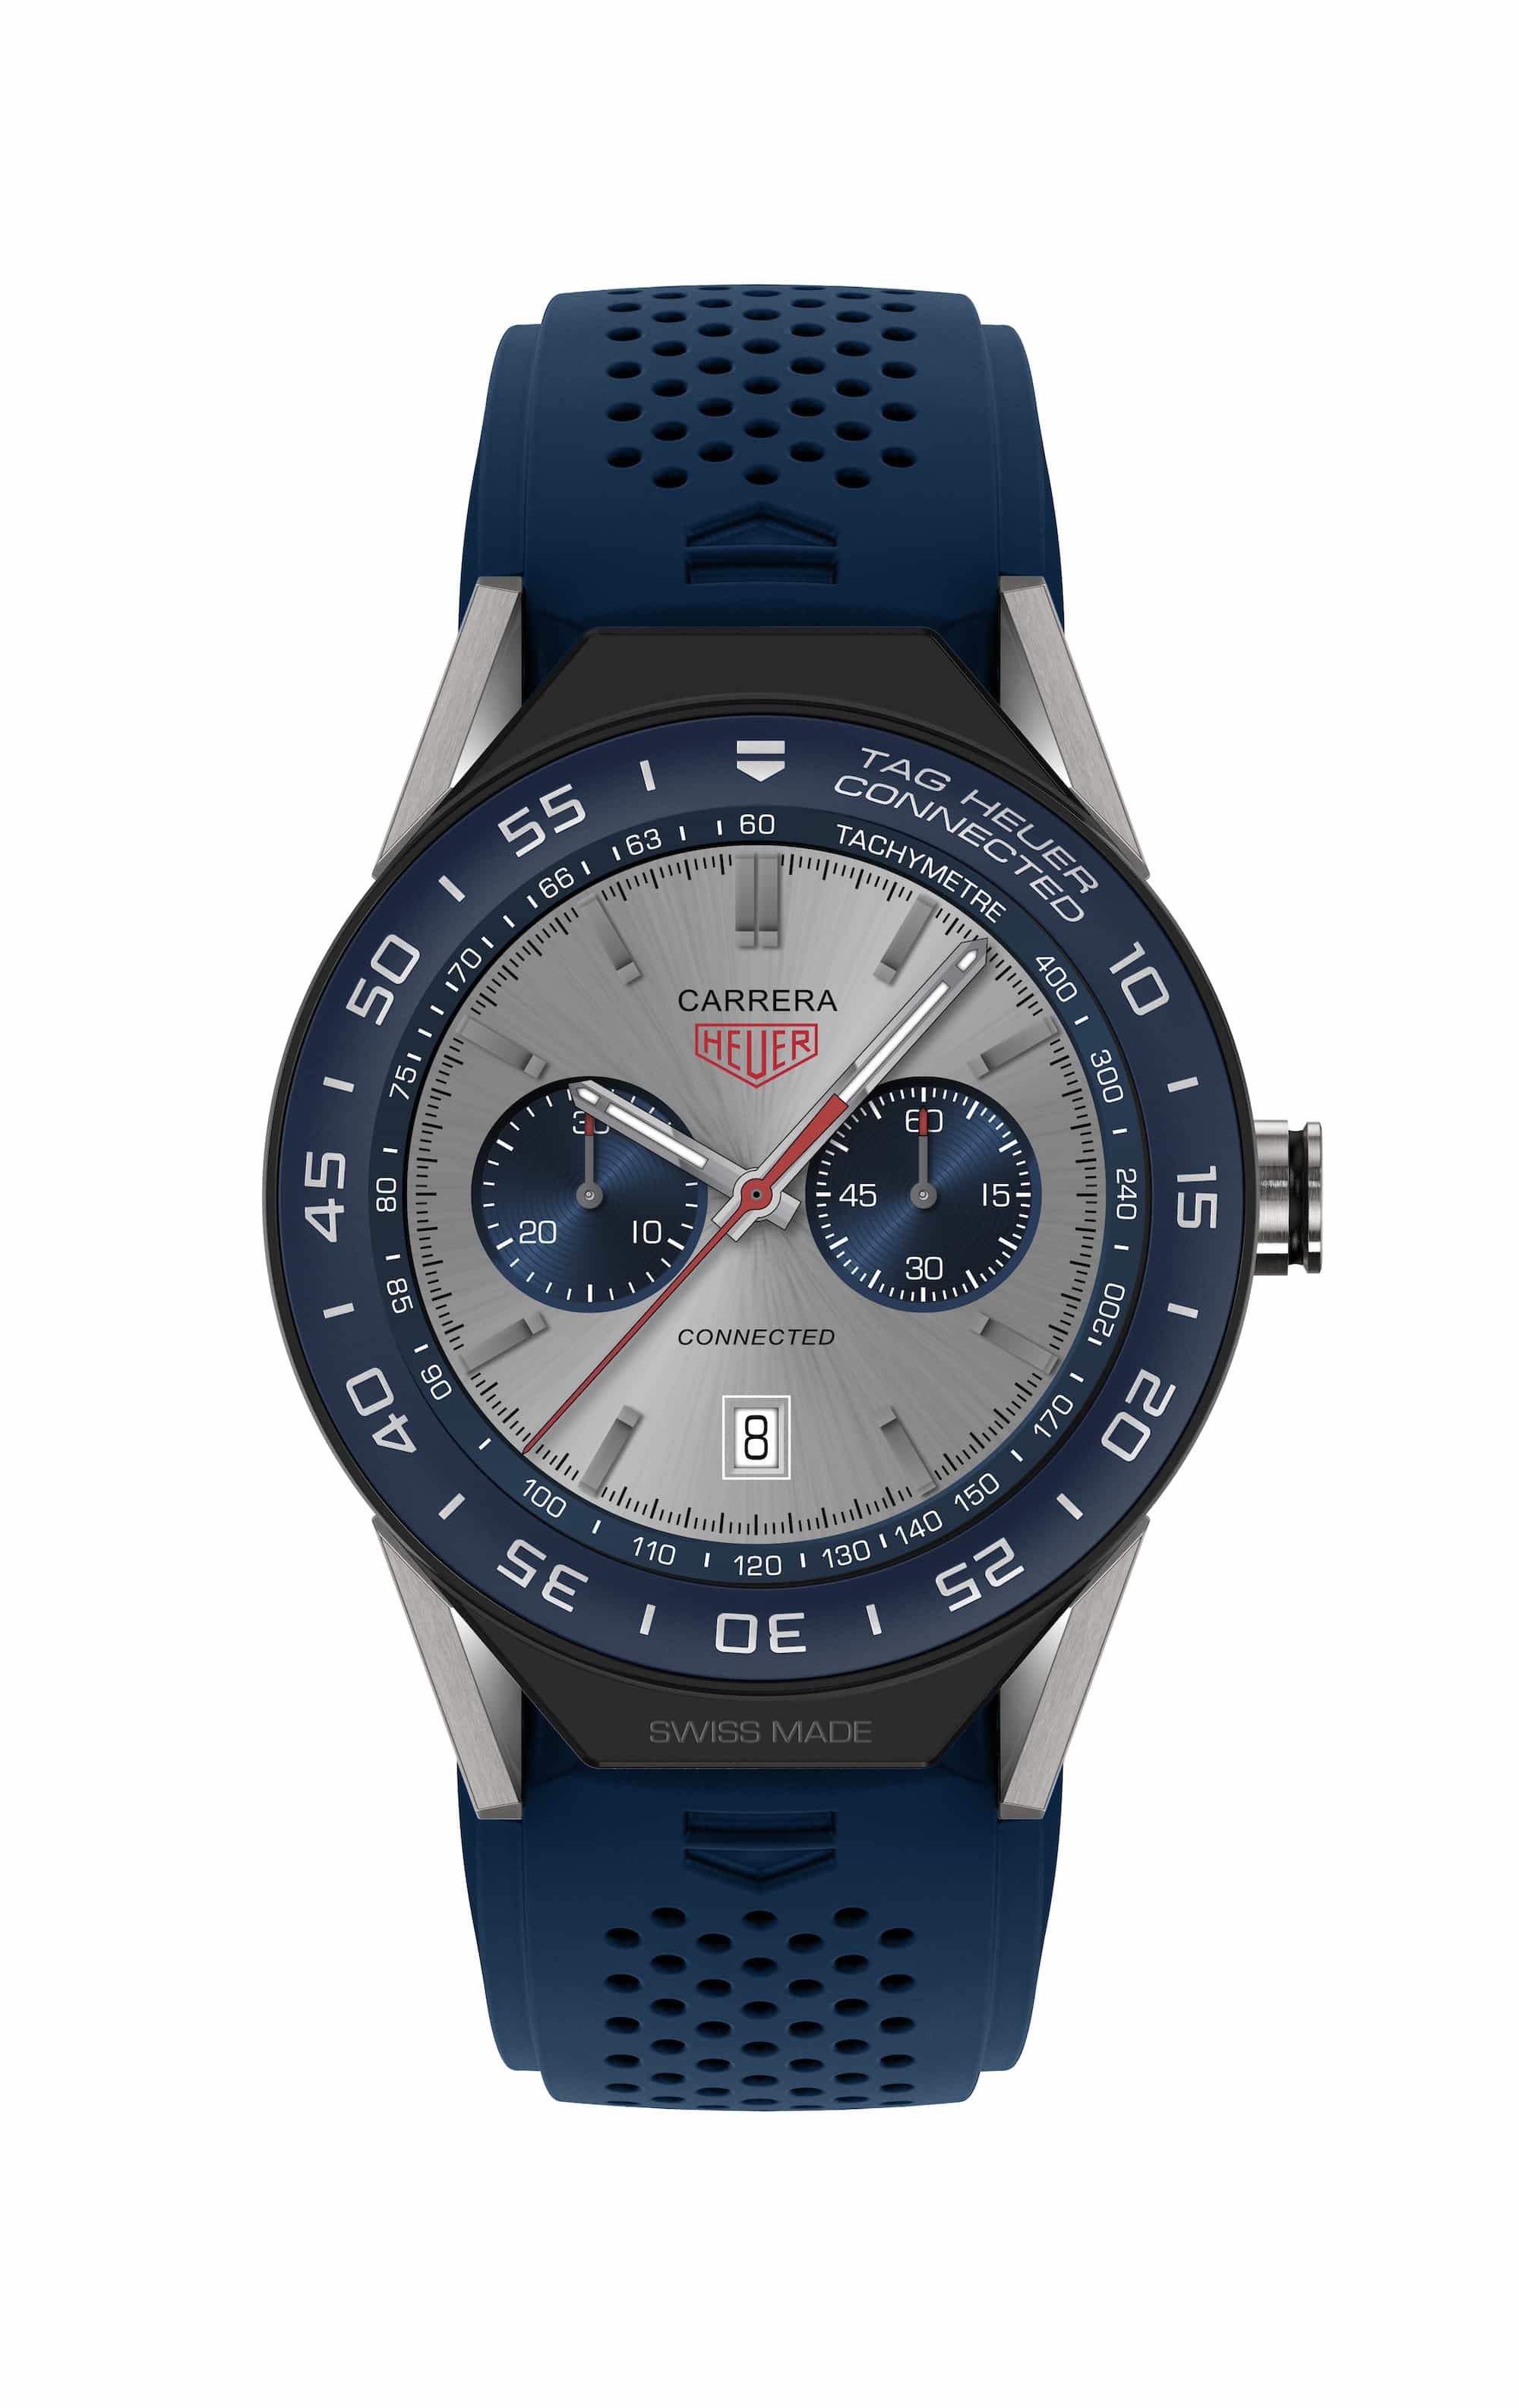 Introducing the TAG Heuer Connected Modular 45 - Revolution Watch